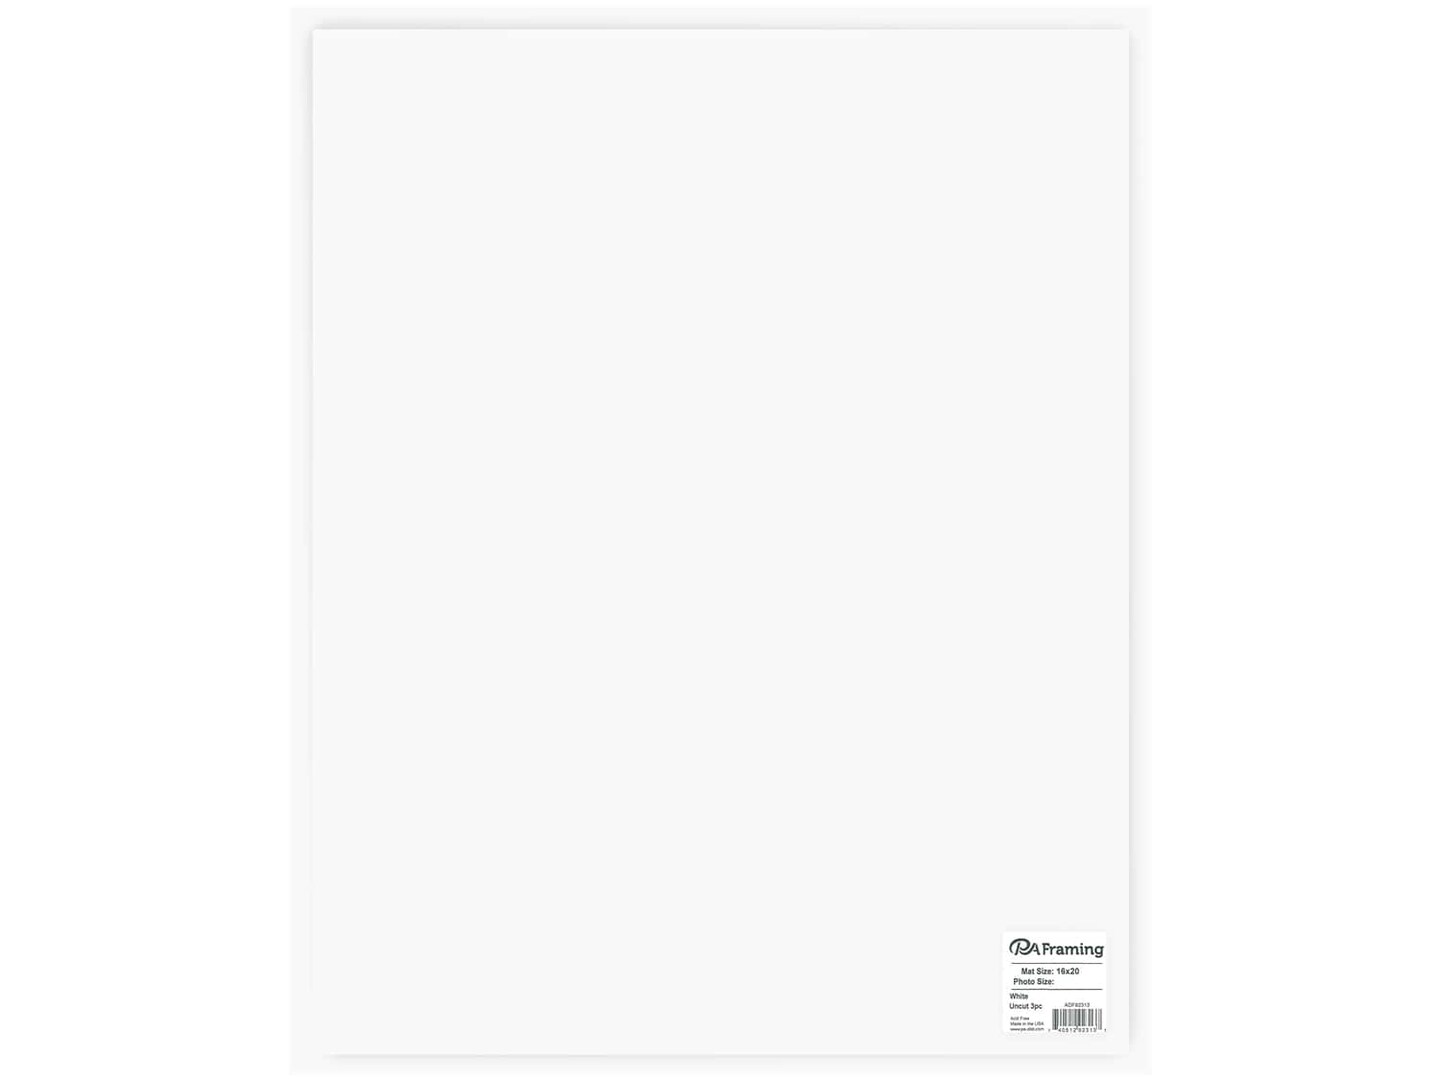 AUEAR, White 16x20 Uncut Mat Matte Boards for Picture Framing, Print,  Artwork - Photo Mat Boards 1/16 Thick, 10 Pack